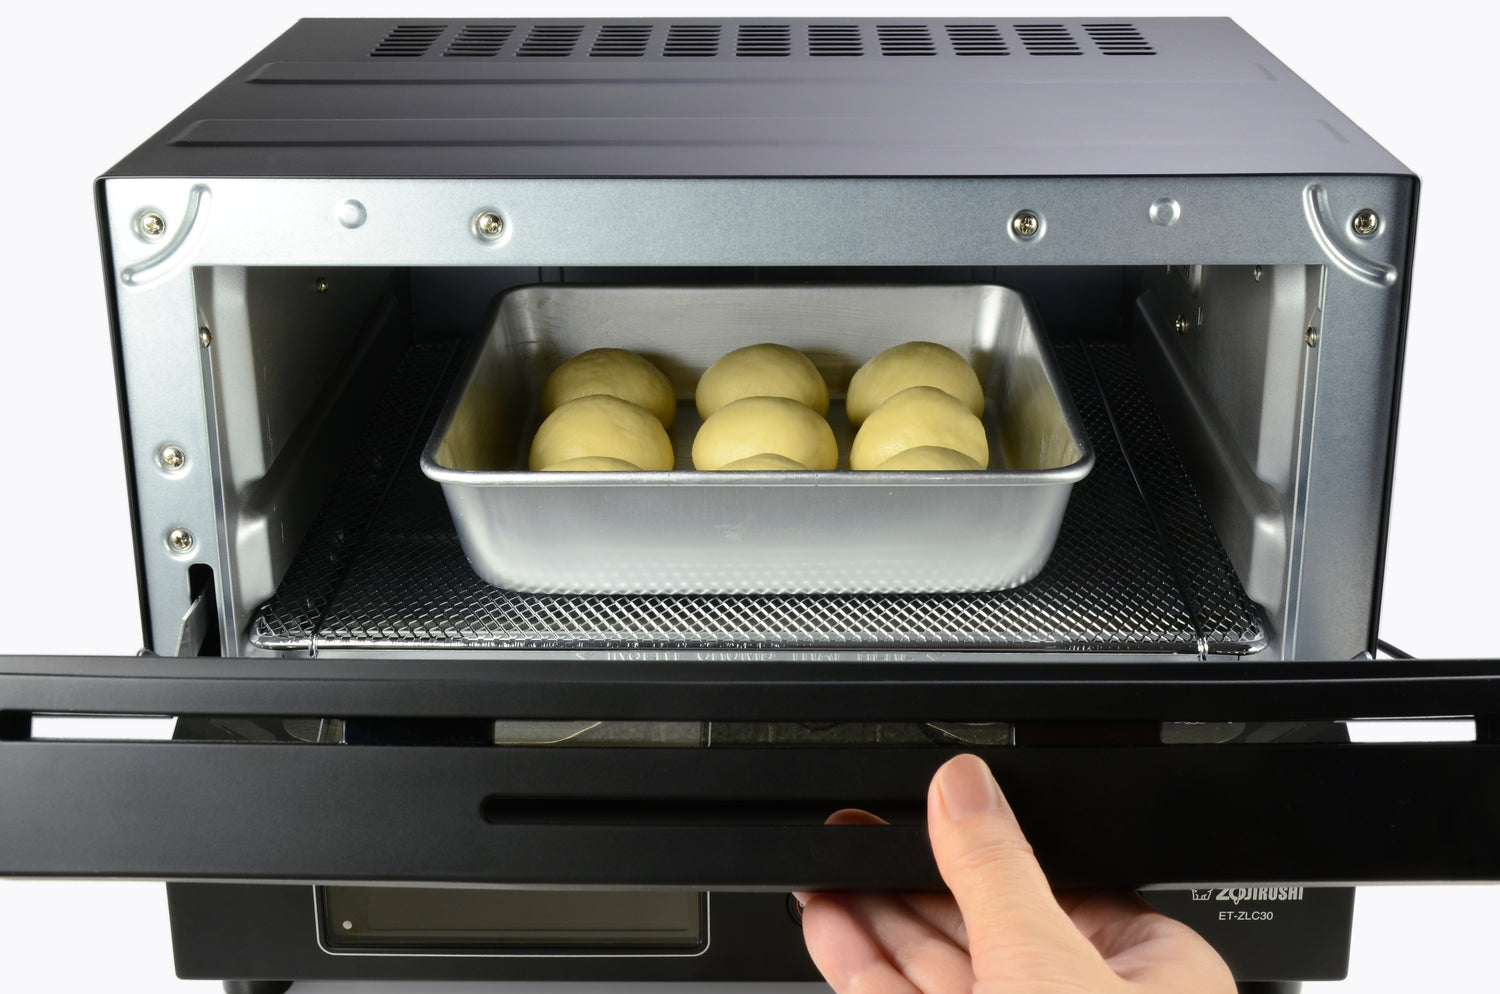 Zojirushi Micom Toaster Oven Review: The Basics Done Right